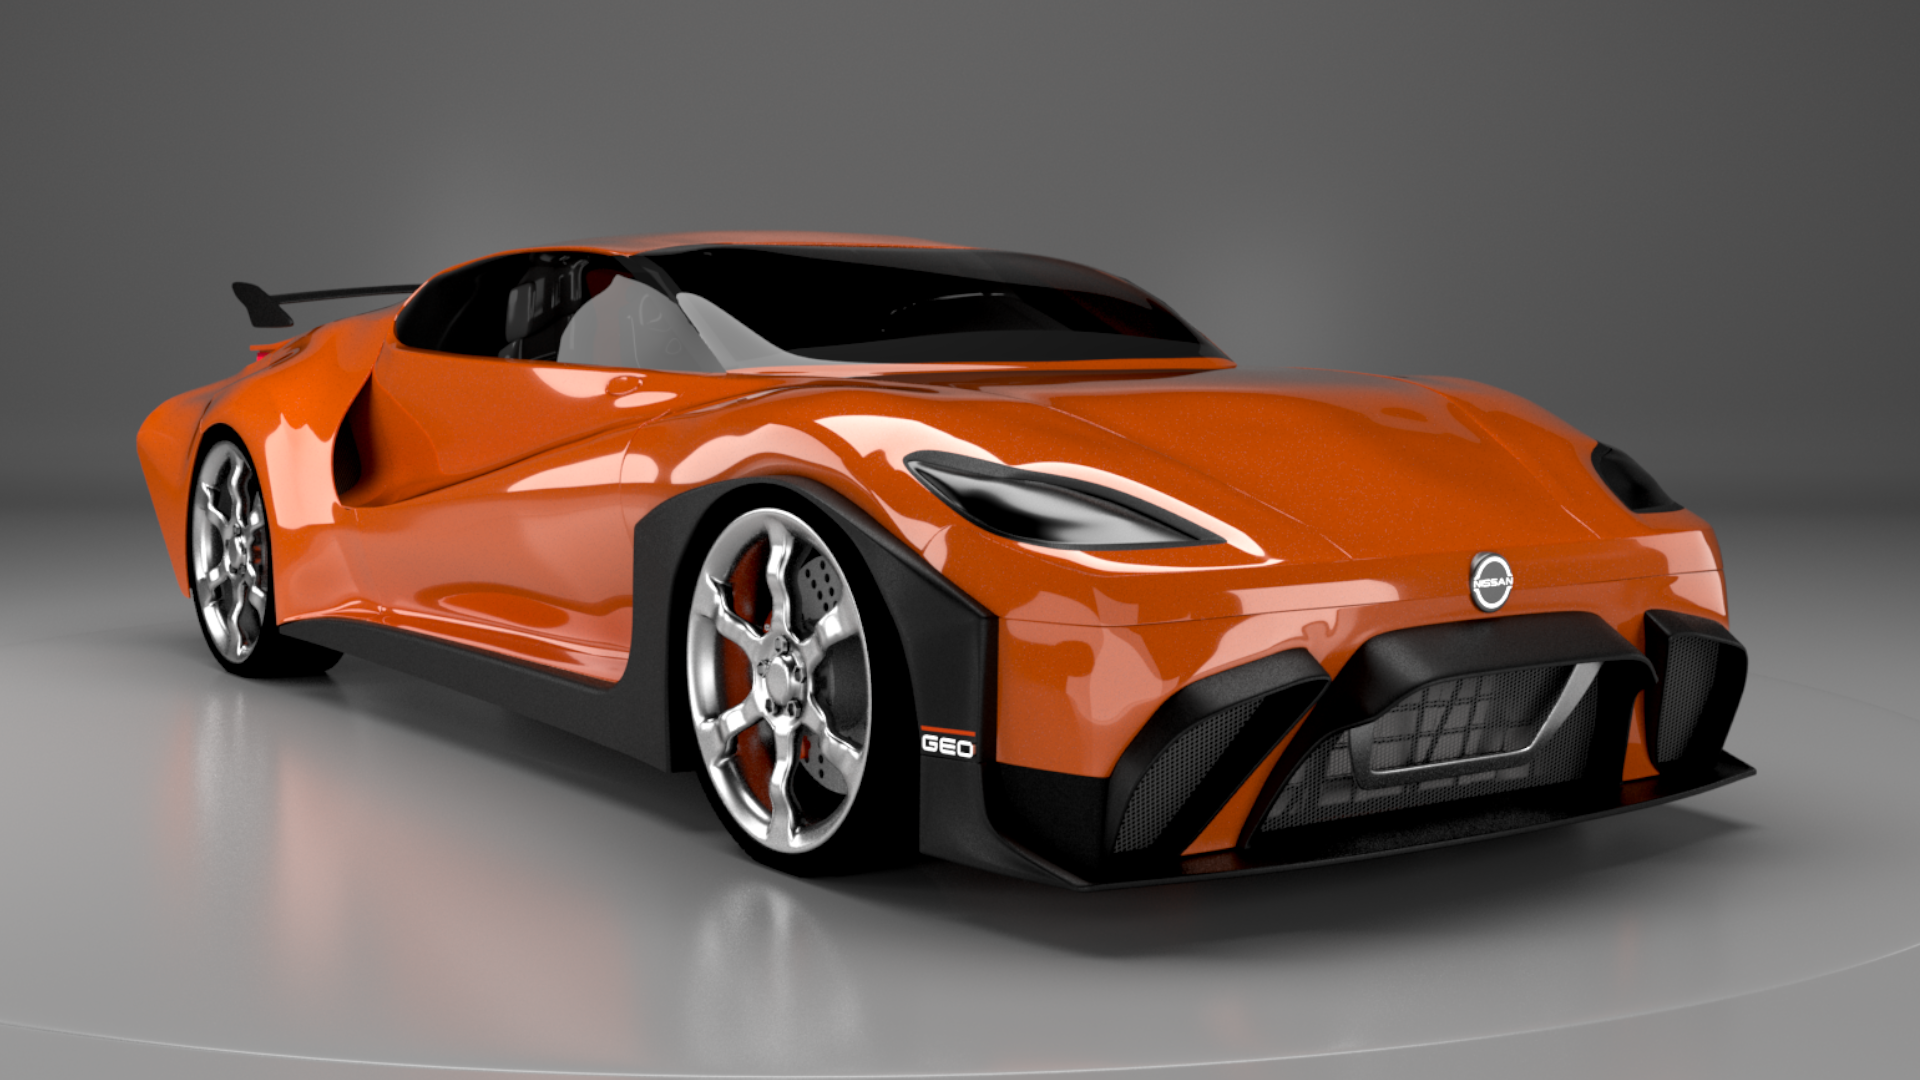 BA Visual effects work by Emily Woodhead, showing a sporty, modern supercar 3D model.